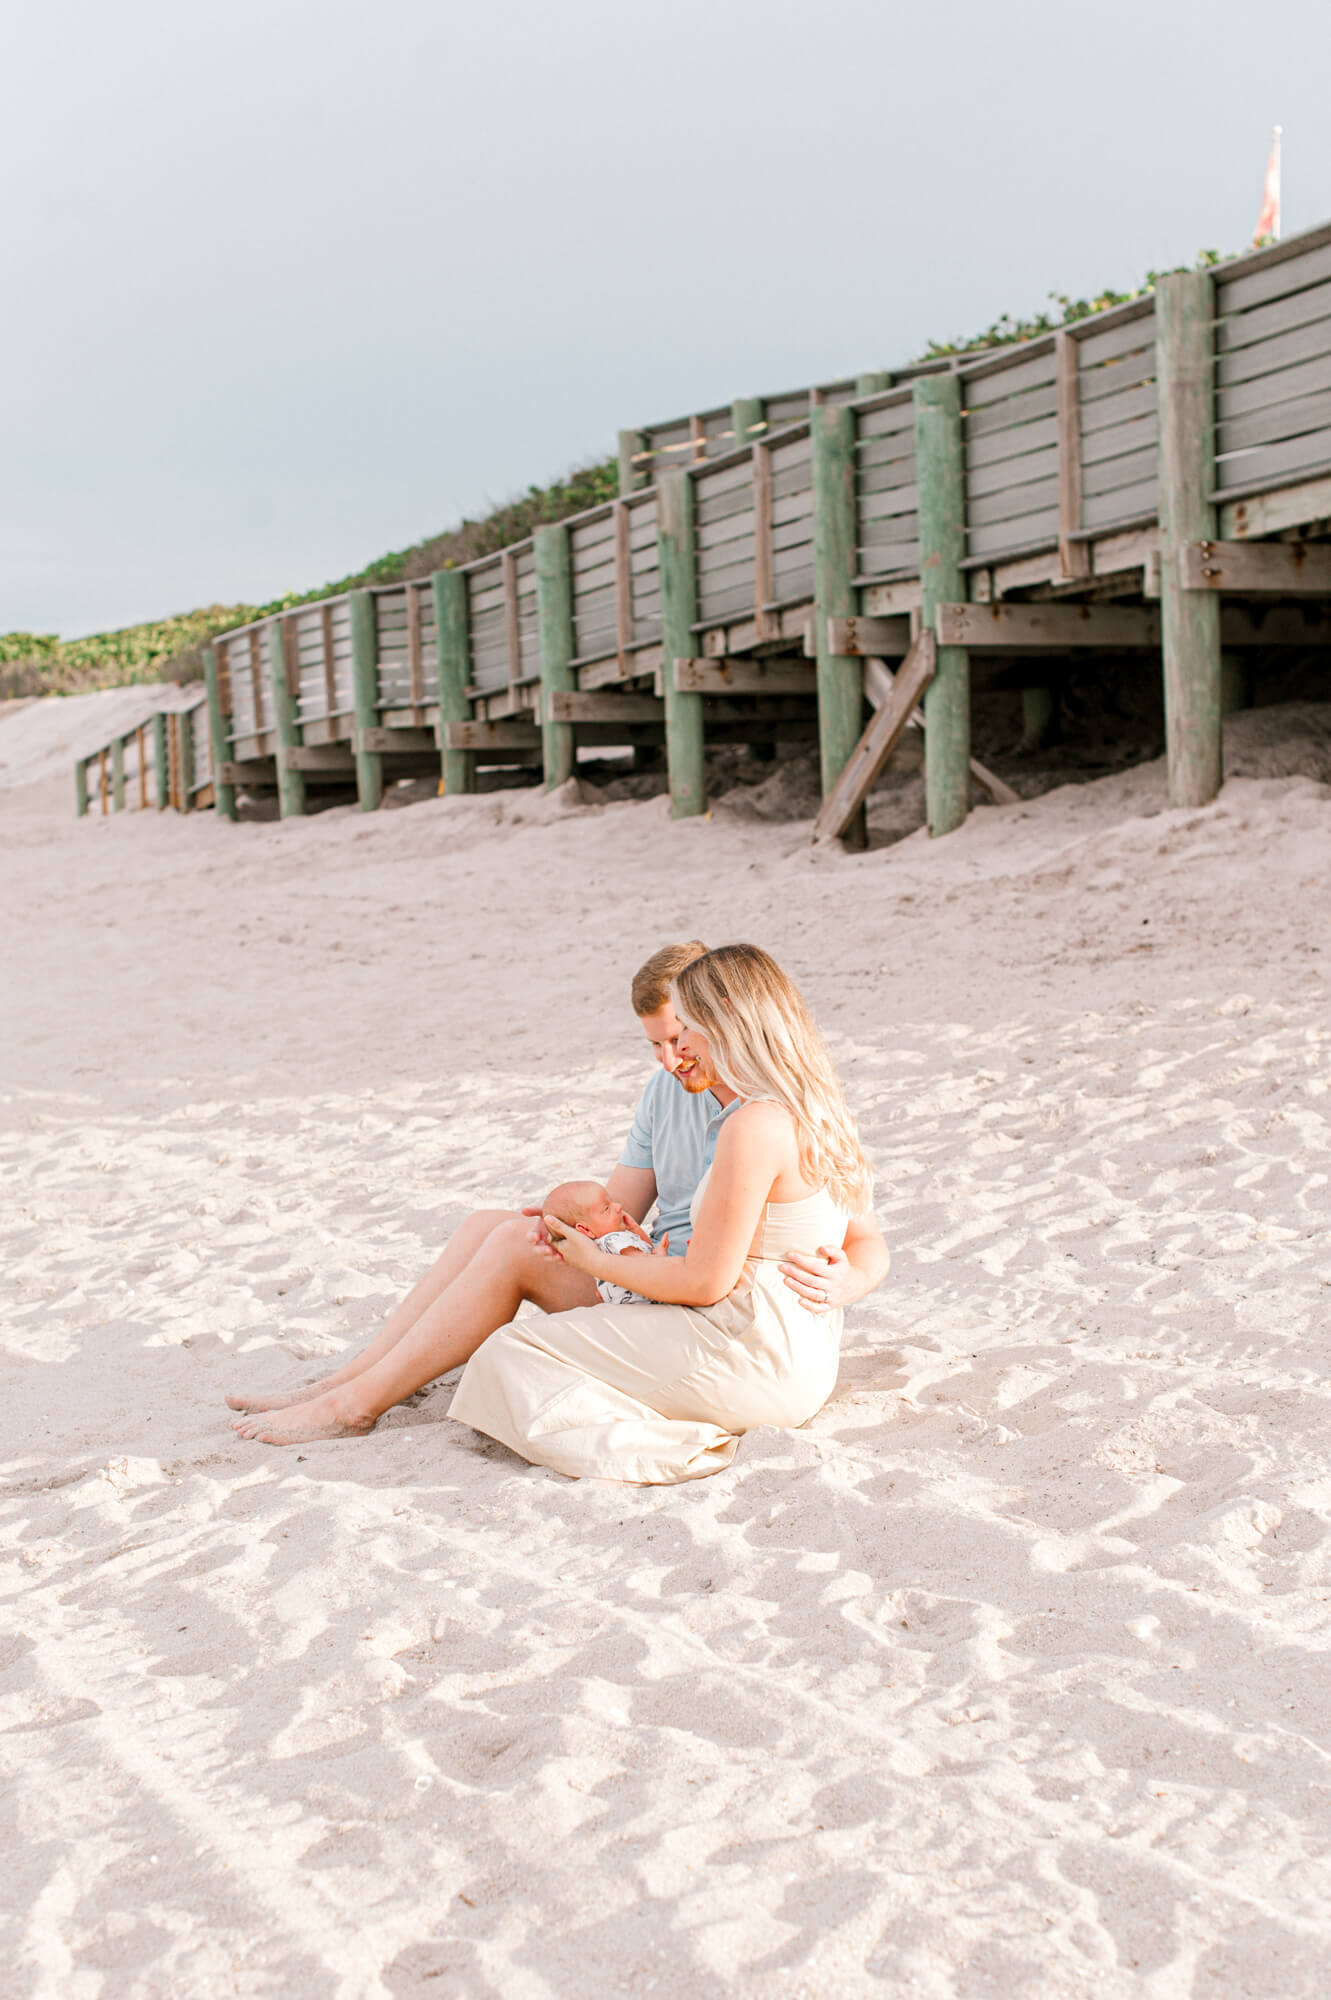 New parents sit in the sand cuddling their new baby boy close in front of a long wooden boardwalk at sunset during their newborn photoshoot Orlando baby stores